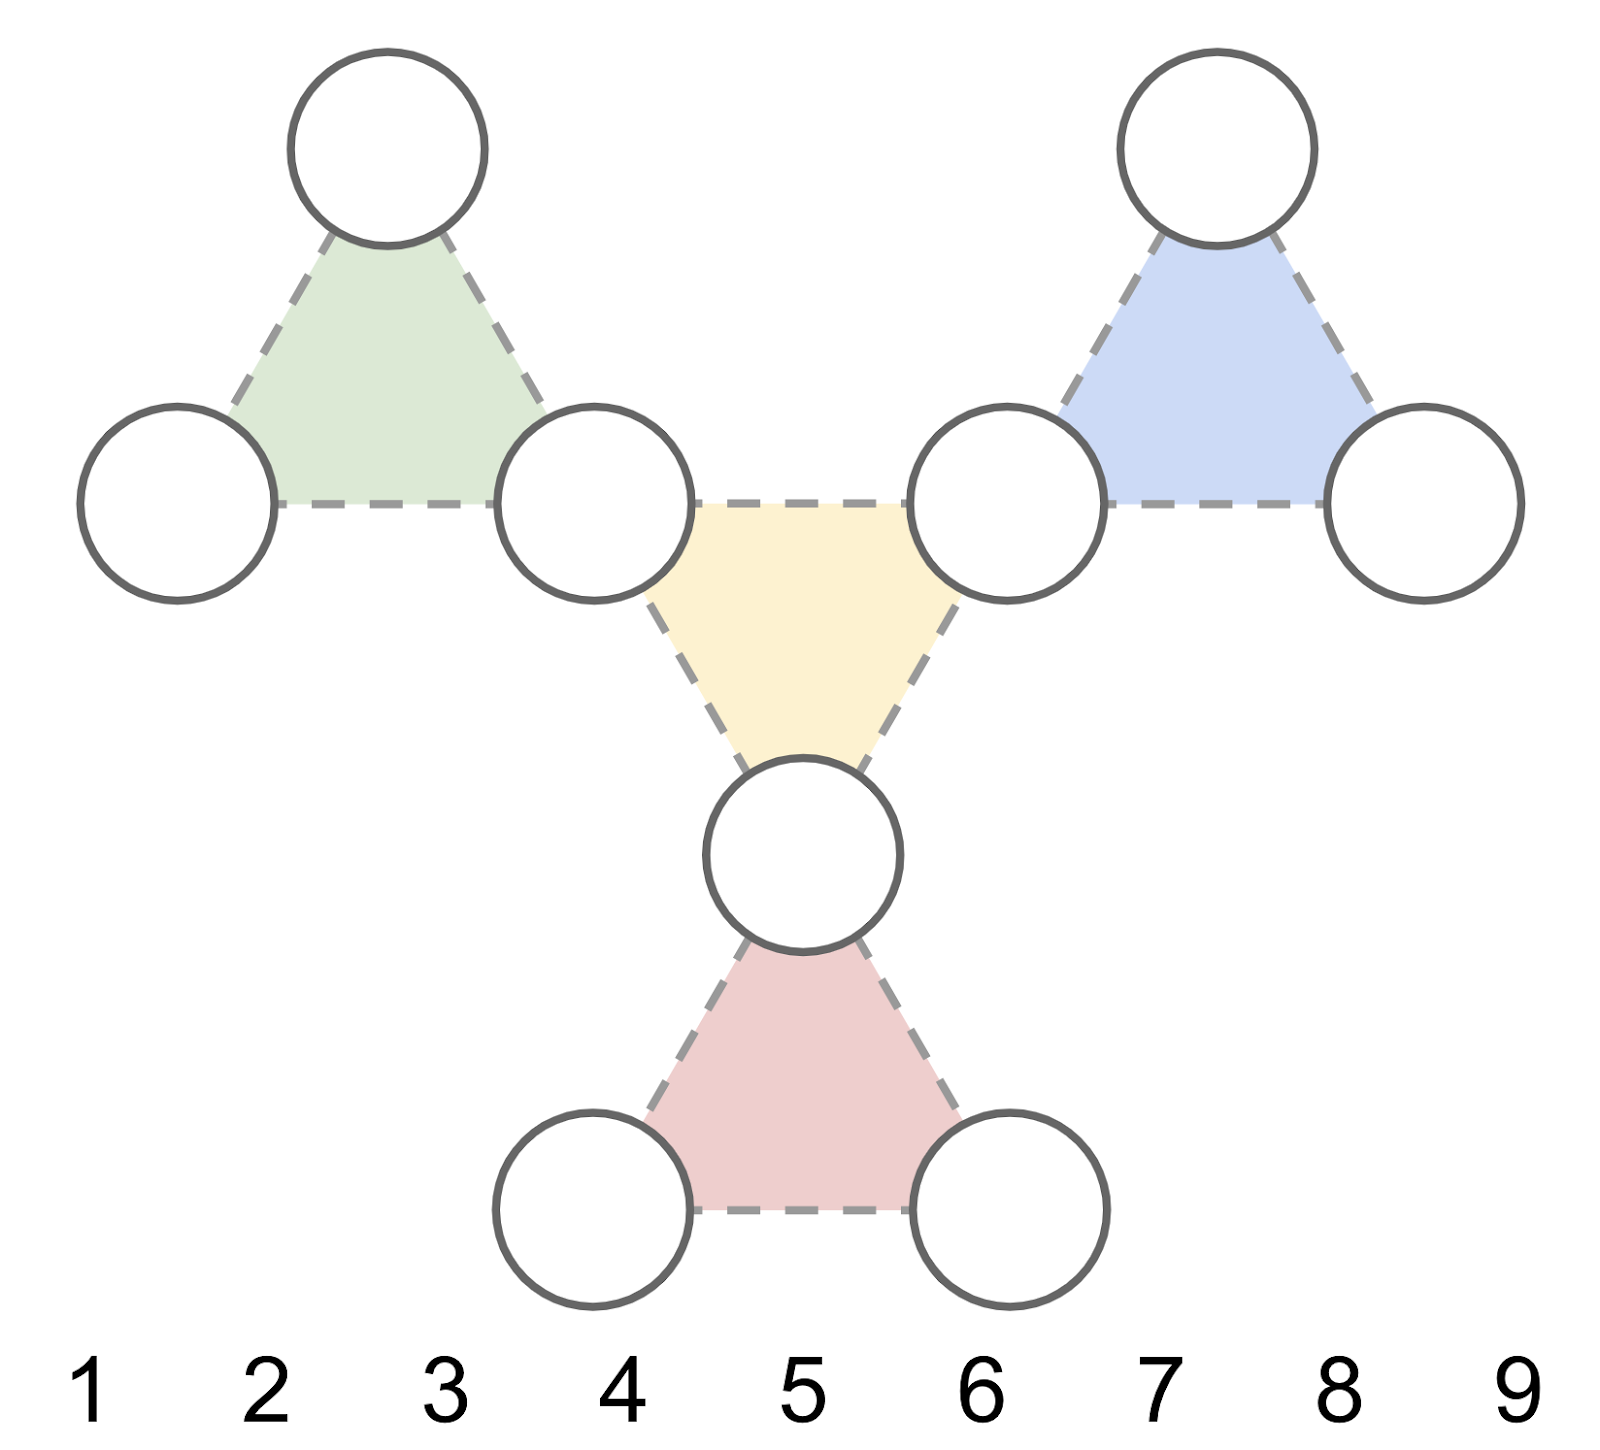 A collection of nine blank circles, organized into three triangles, one circle for each corner. There is a green triangle in the top left, a blue triangle in the top right, and a red triangle at the bottom. One circle from each of these forms the centre yellow triangle in the middle of the puzzle. The digits from 1-9 are listed underneath.